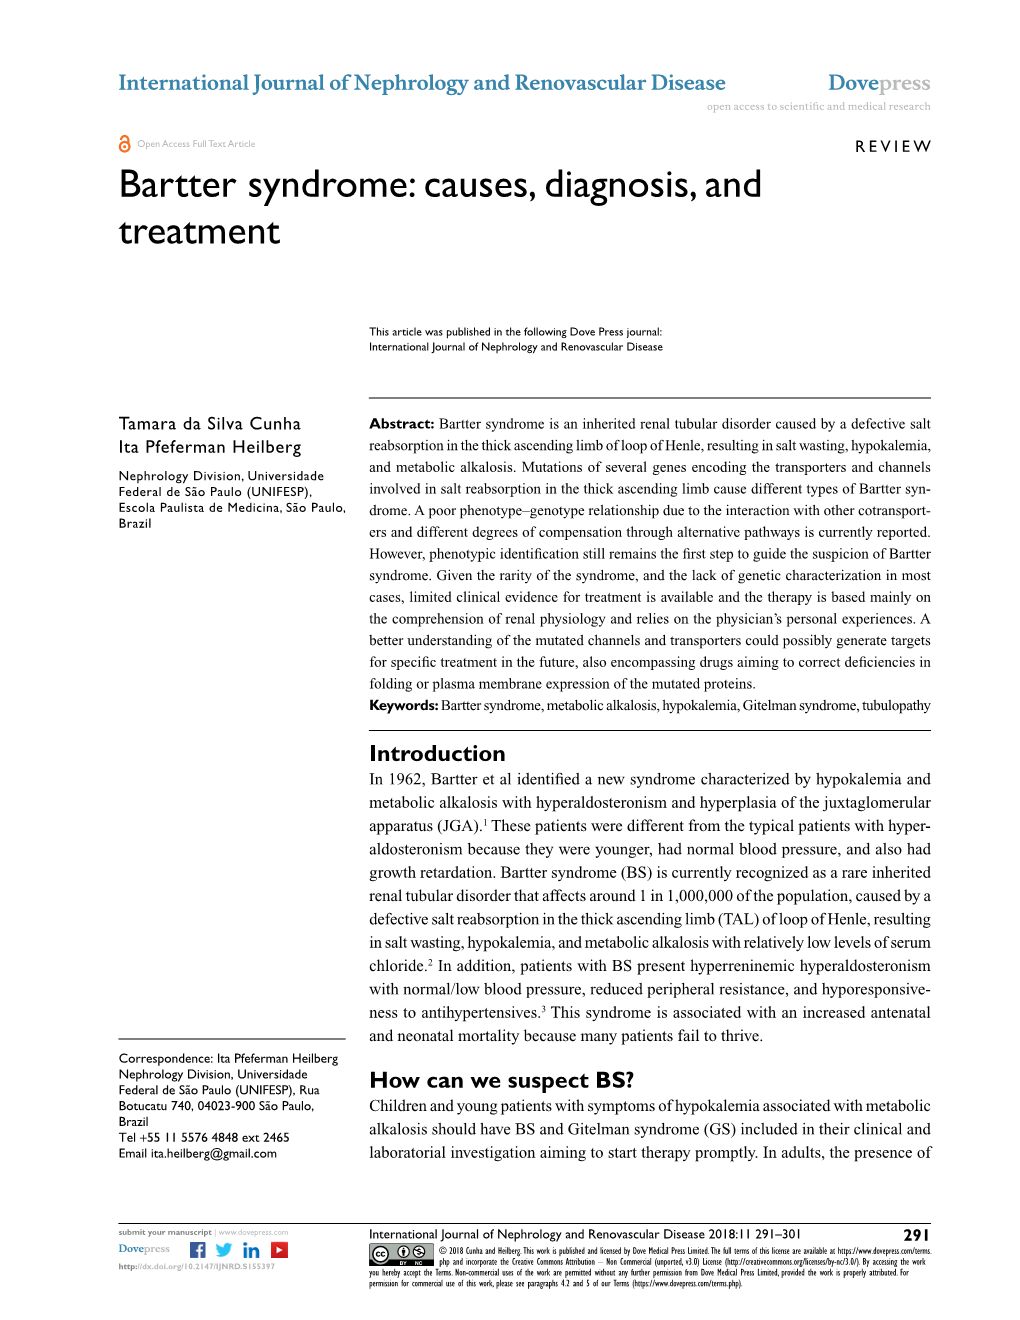 Bartter Syndrome: Causes, Diagnosis, and Treatment